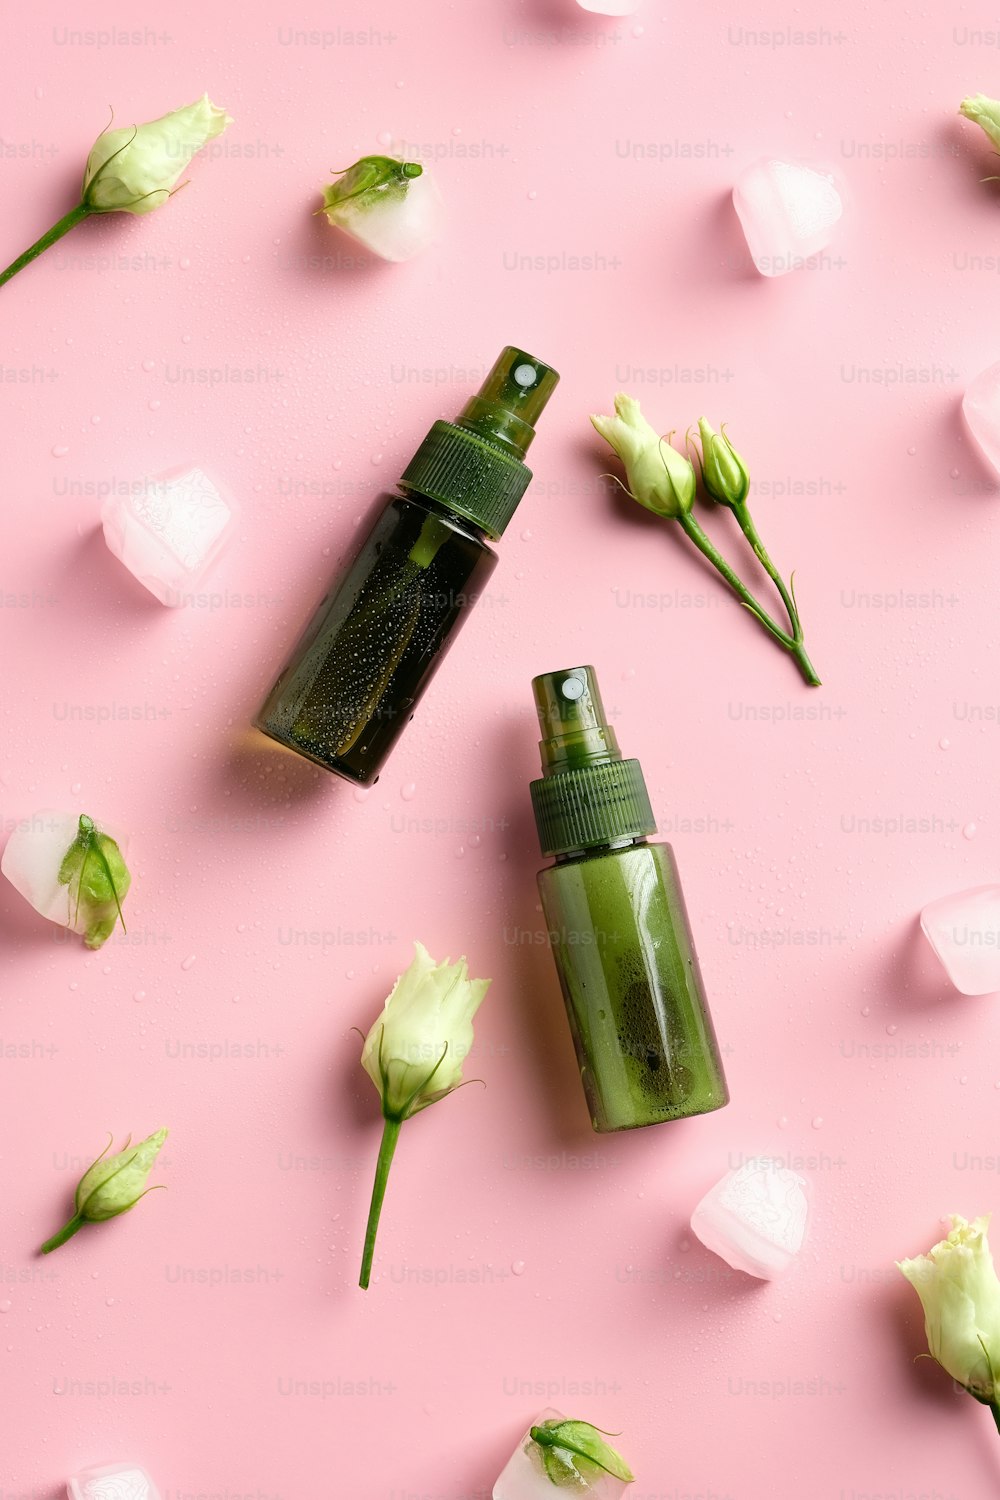 Green spray bottles with ice cubes and flowers on pink background. Natural organic skin care beauty products. Flat lay, top view.